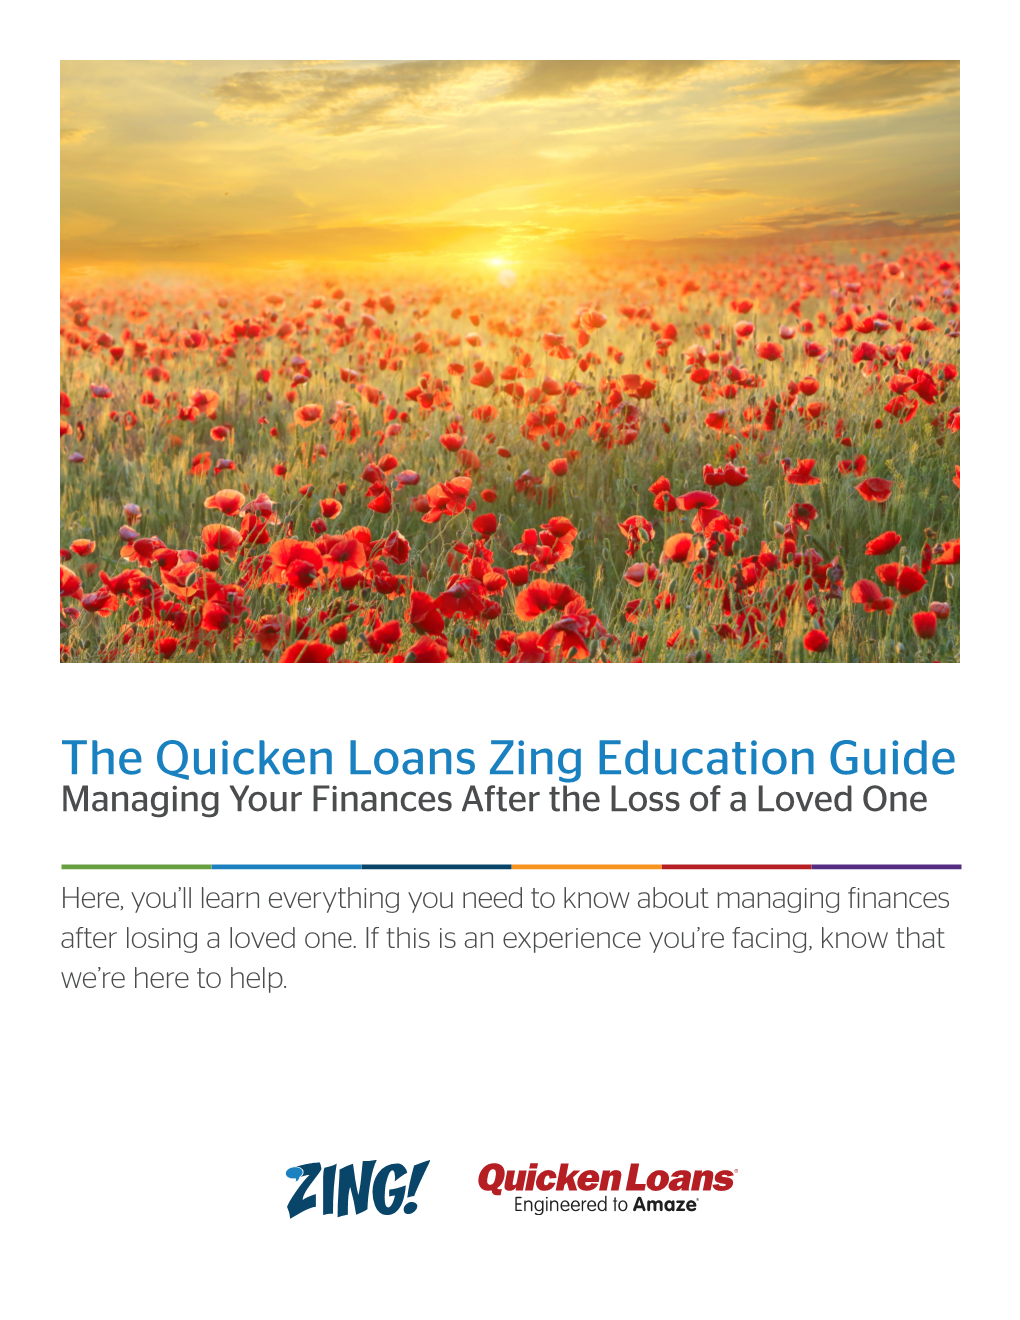 The Quicken Loans Zing Education Guide Managing Your Finances After the Loss of a Loved One